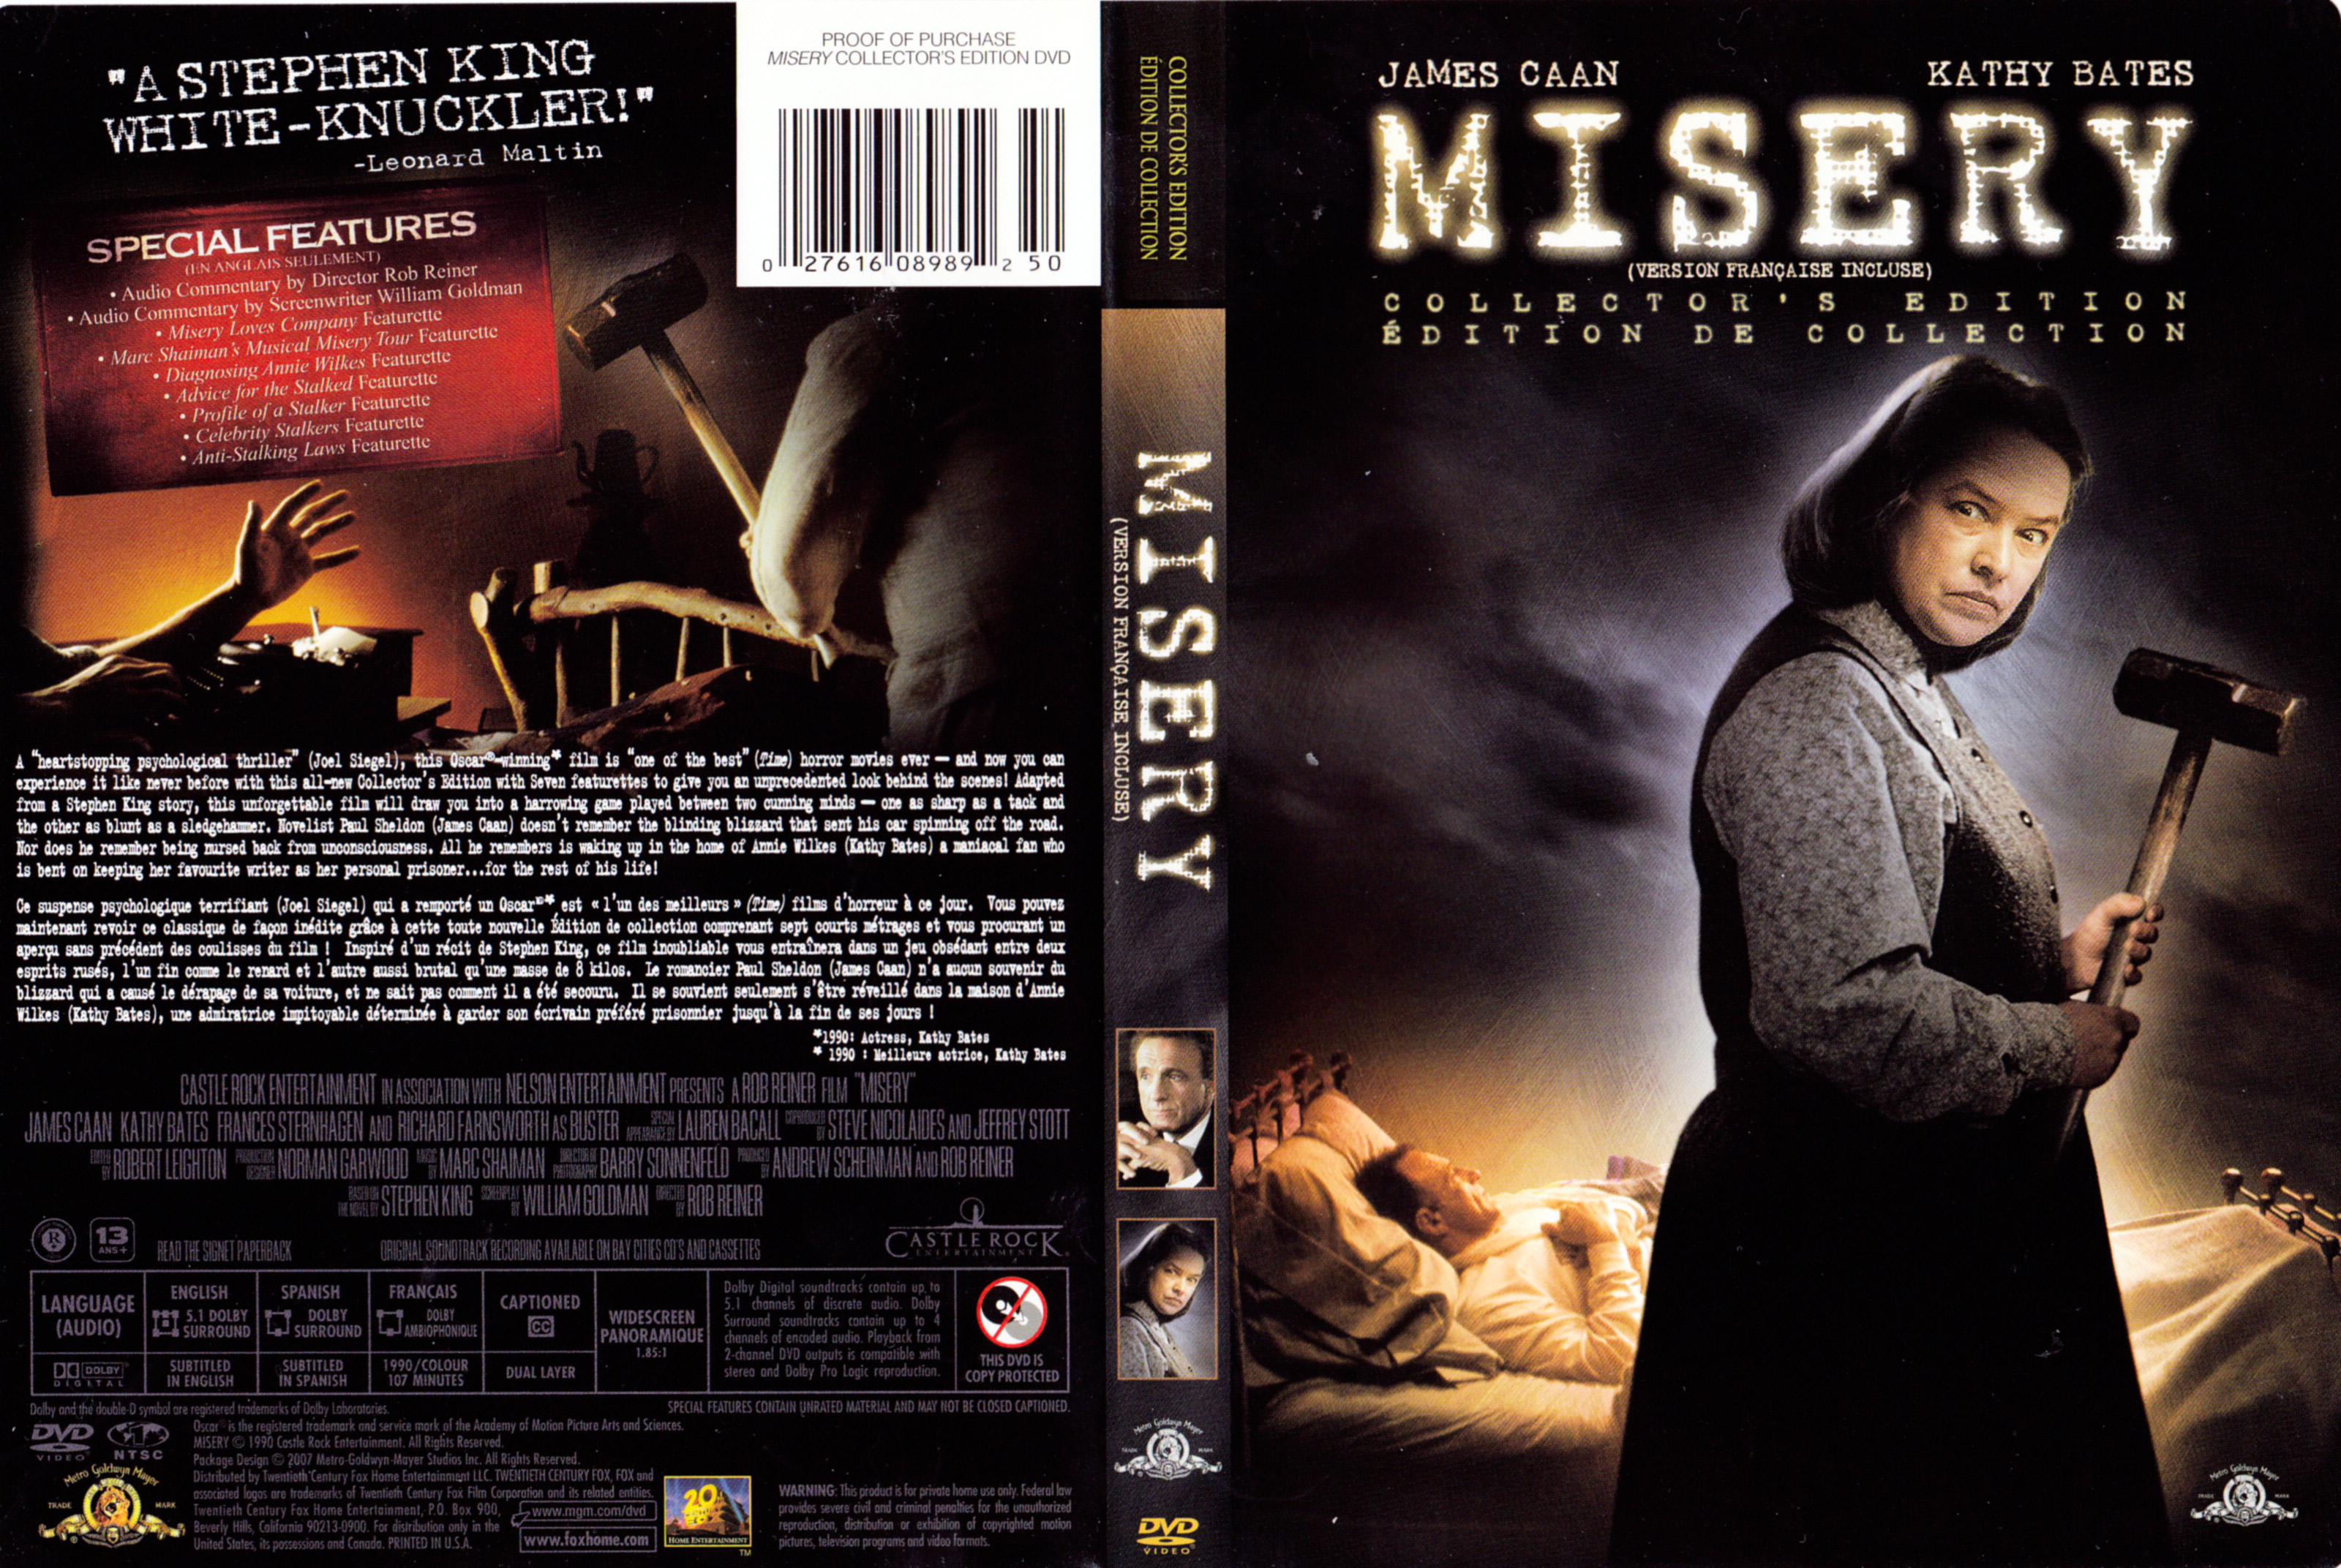 Jaquette DVD Misery (Canadienne)